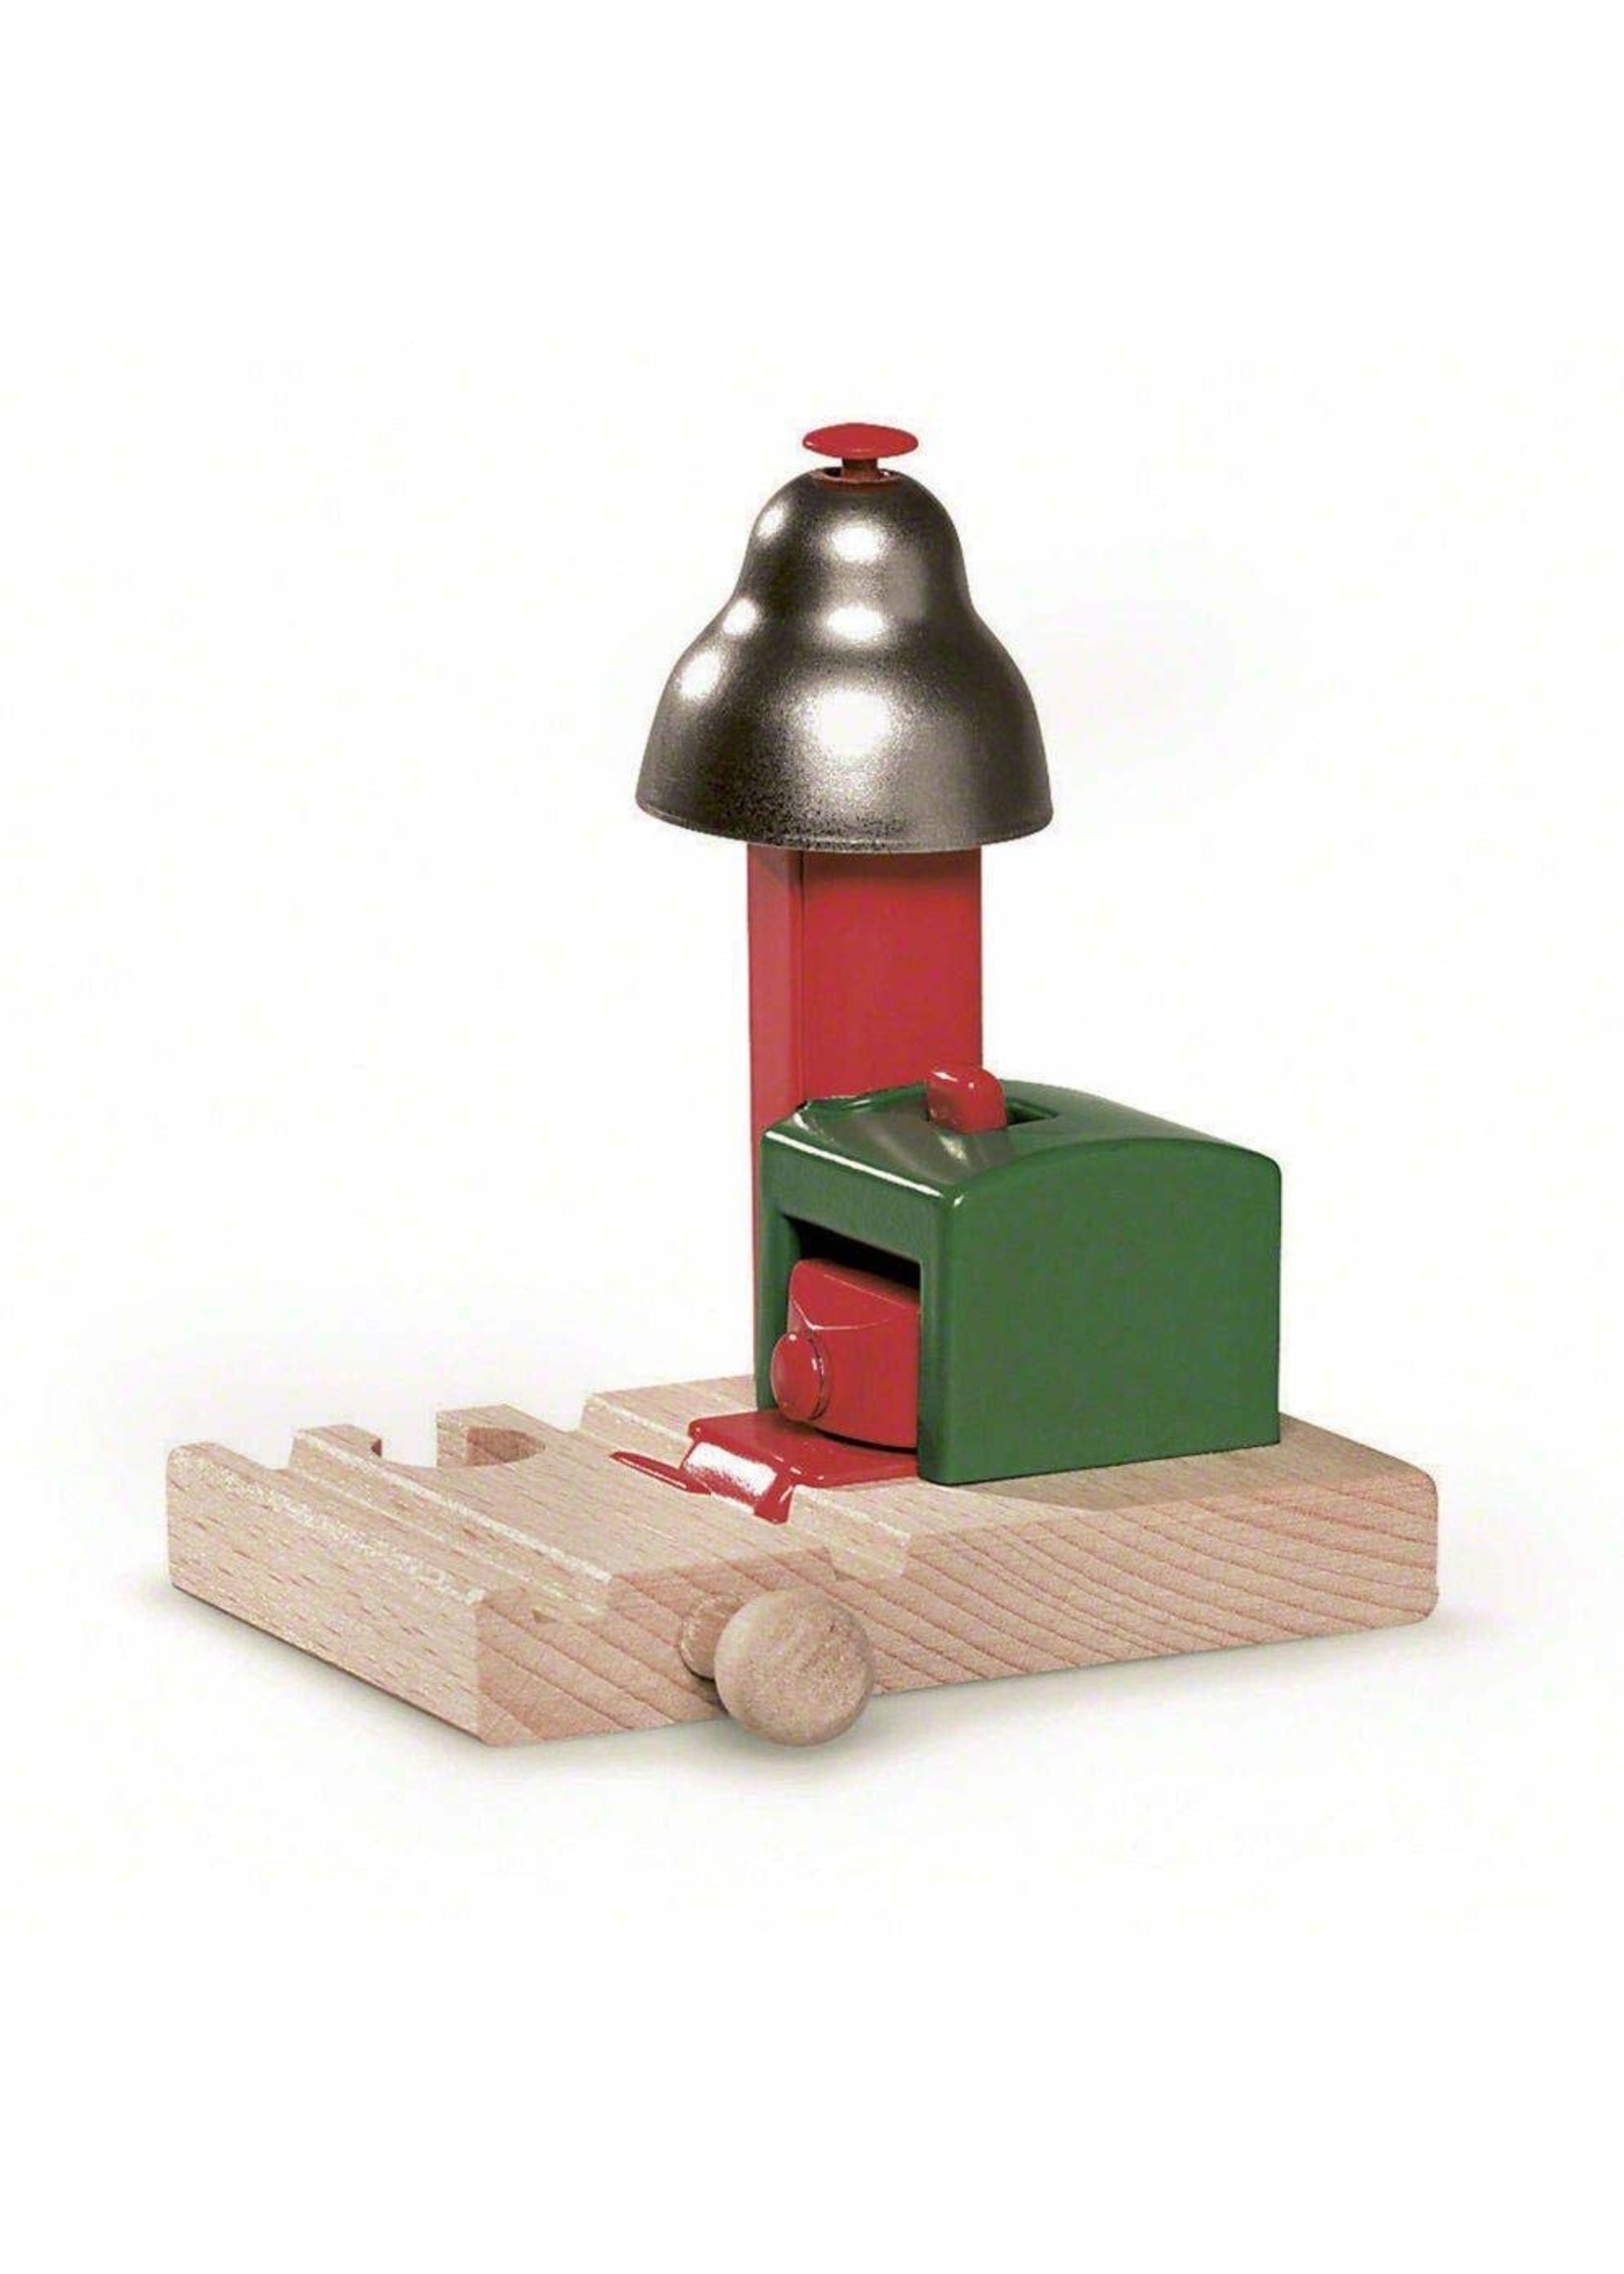 Brio 33754 - Magnetic Bell Signal